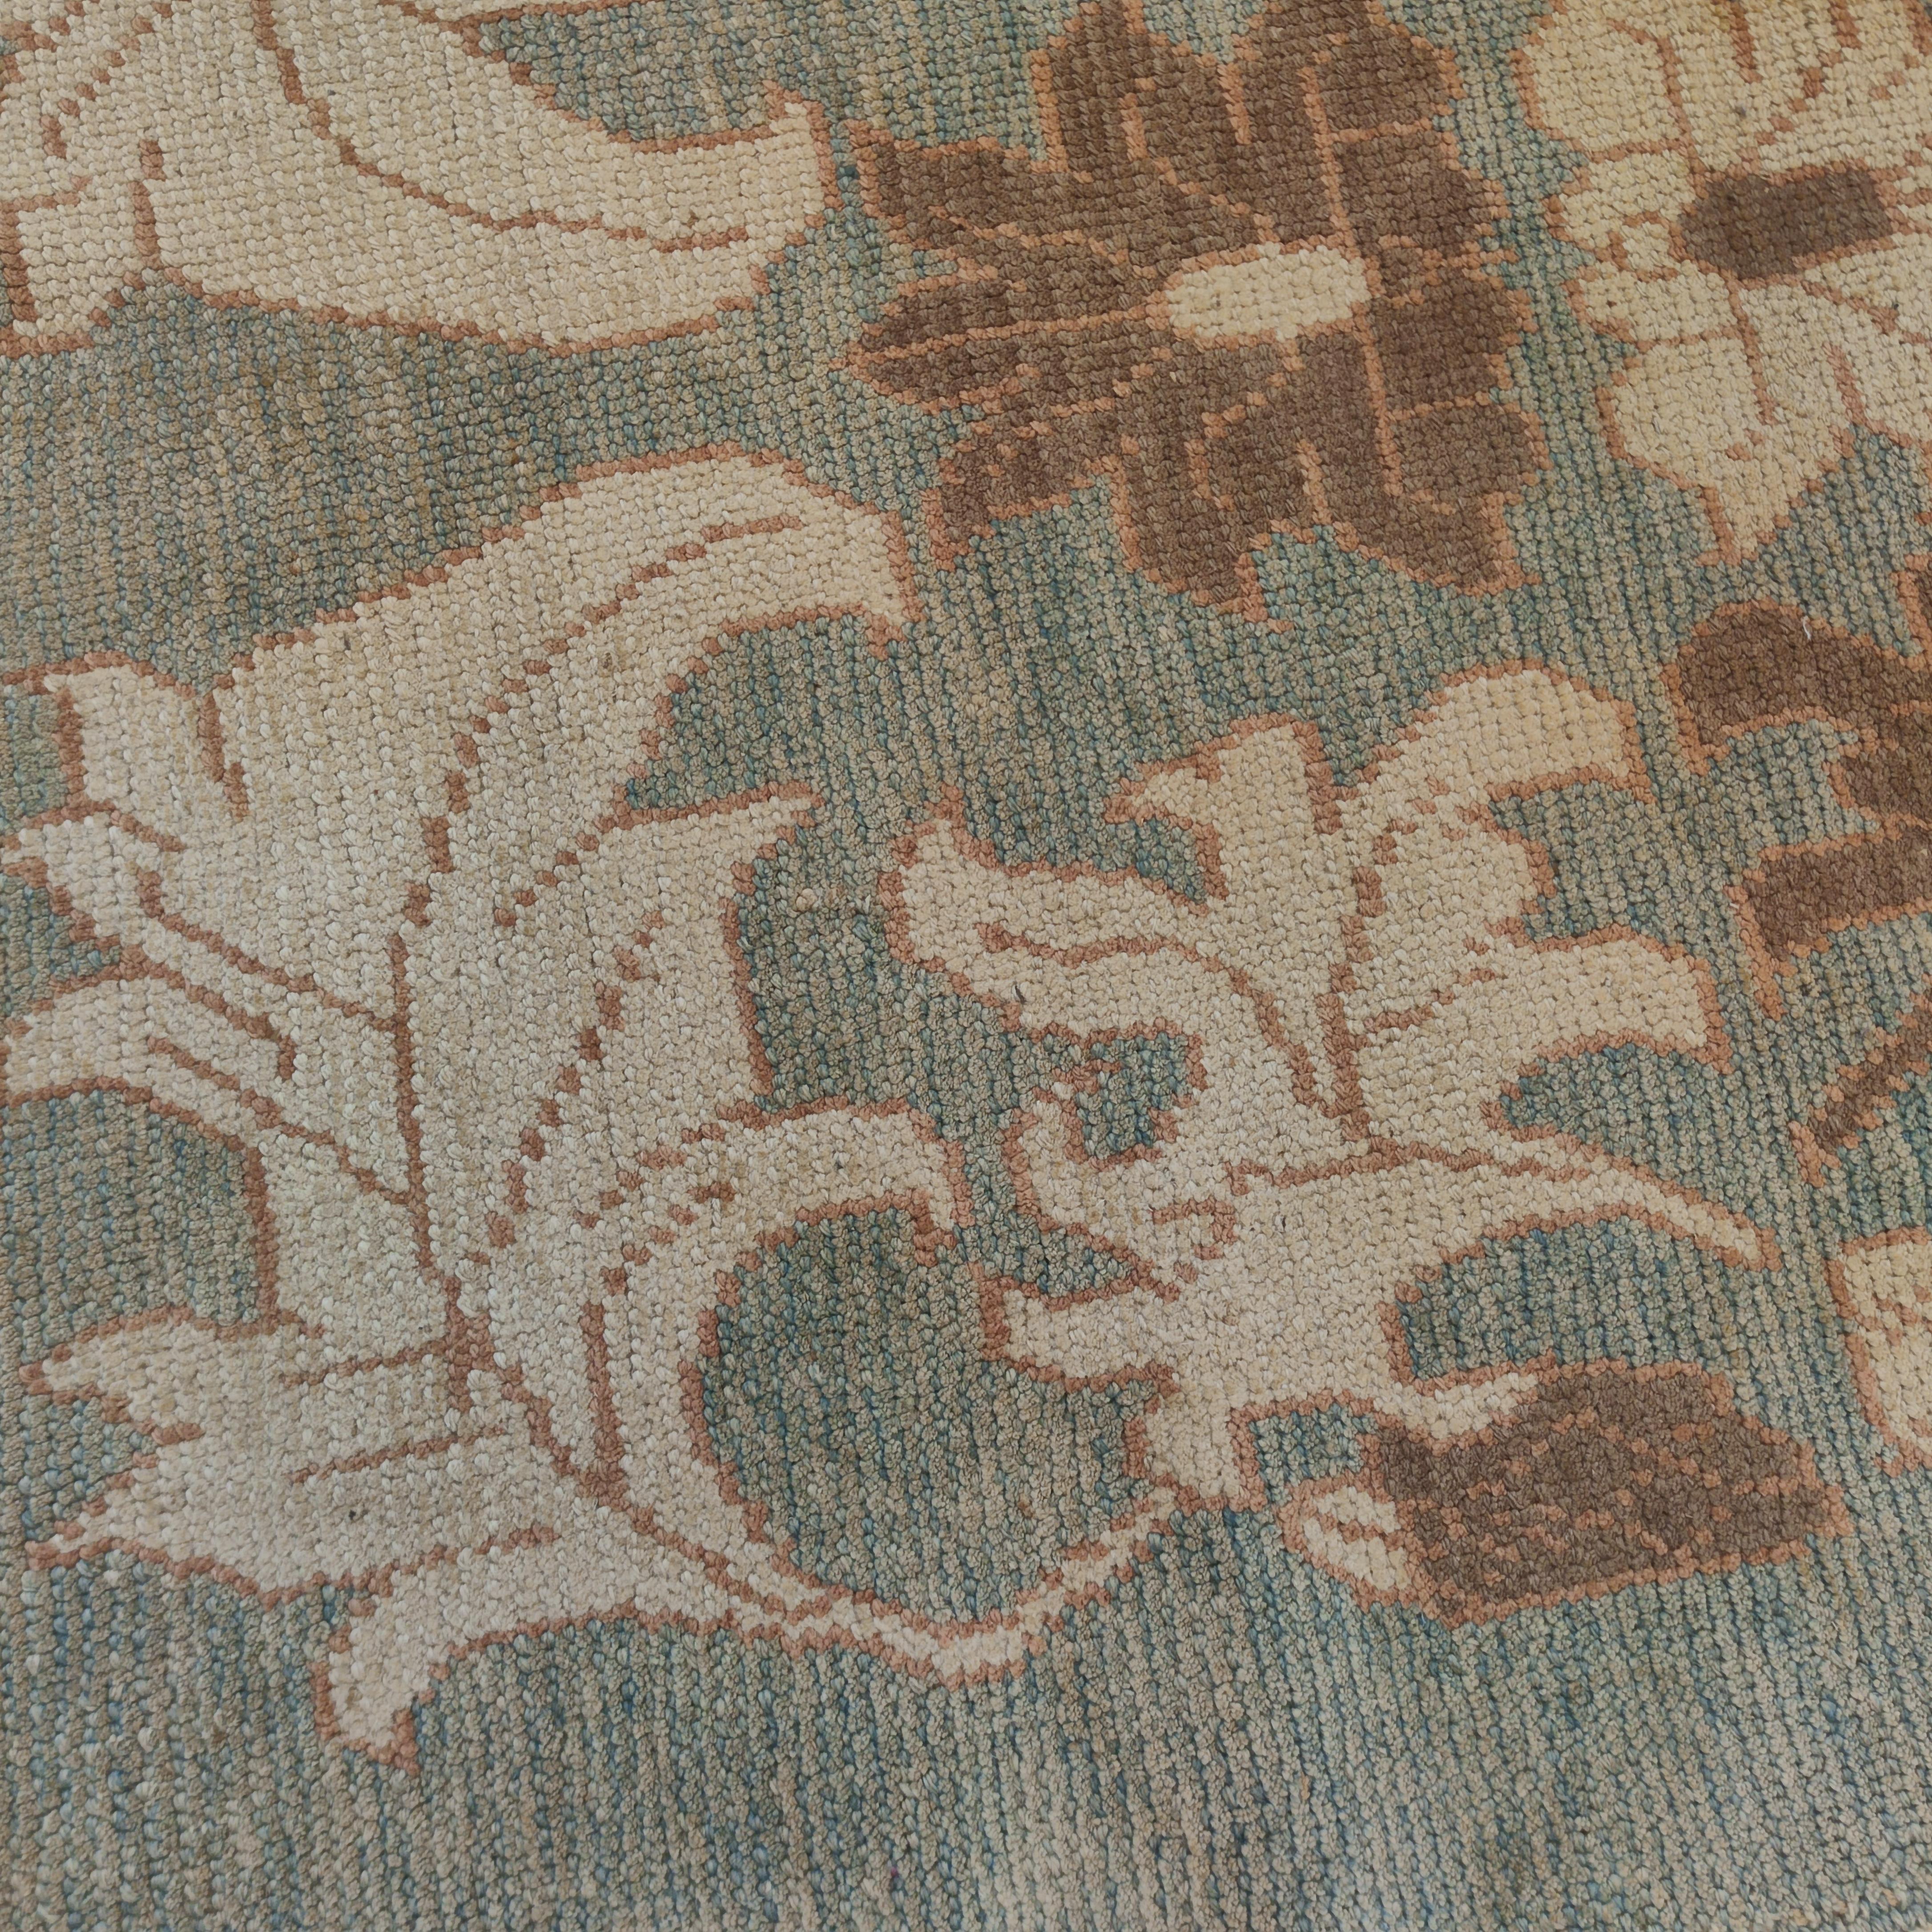 A highly refined Oushak rug distinguished by a stunning aqua blue background, embellished by an oversized pattern composed of a large central palmettes flanked by a network of elaborately drawn leafs in ivory and light brown. Designs of this type